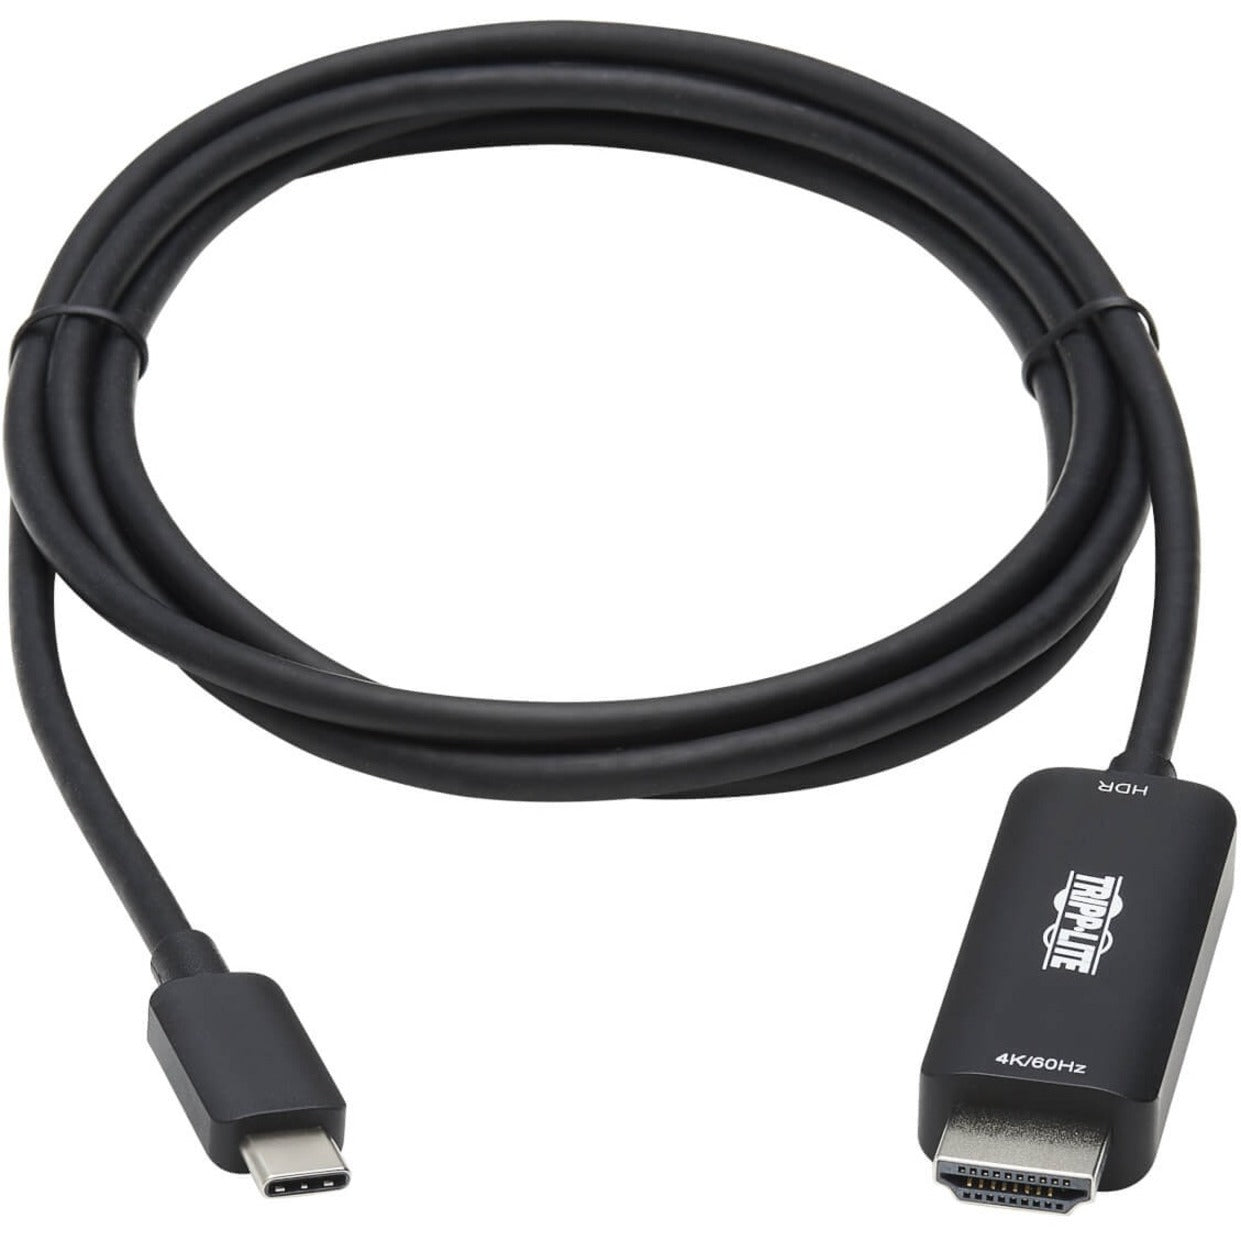 Tripp Lite U444-006-HDR2BE USB-C to HDMI Adapter Cable, M/M, Black, 6 ft.